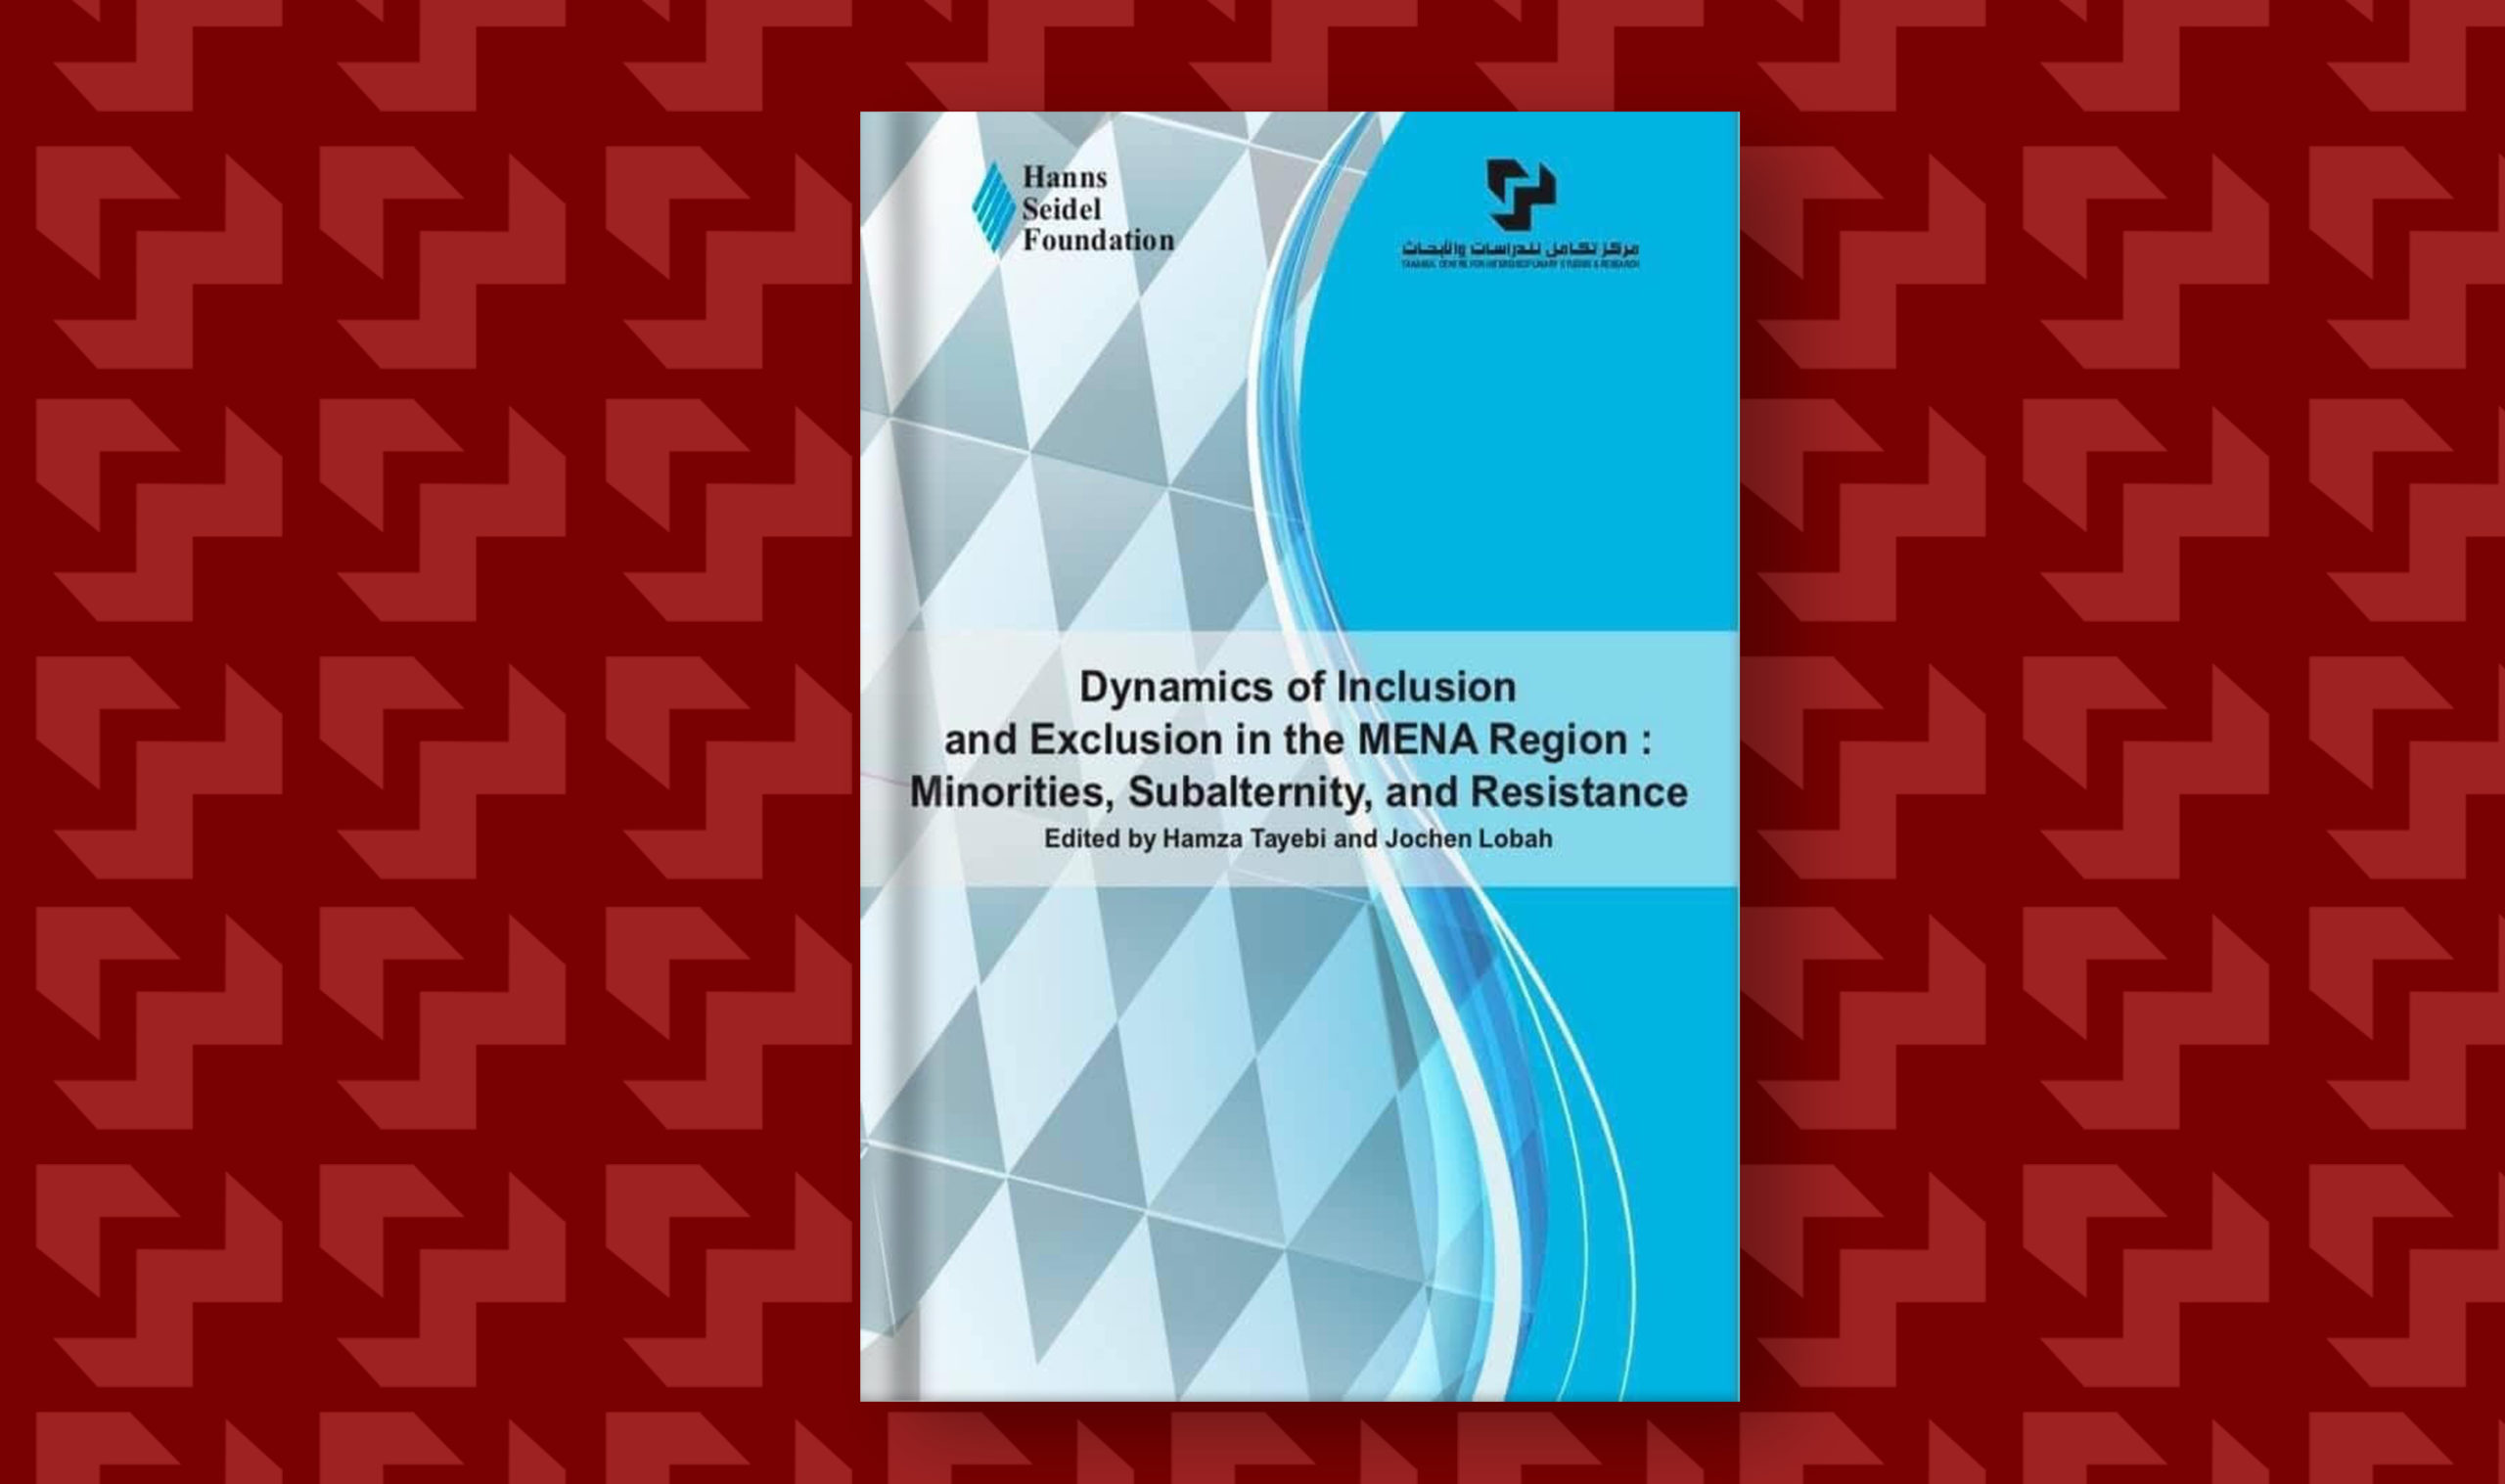 DYNAMIC OF Inclusion and Exclusion in the MENA Region: Minorities, Subalternity, and Resistance